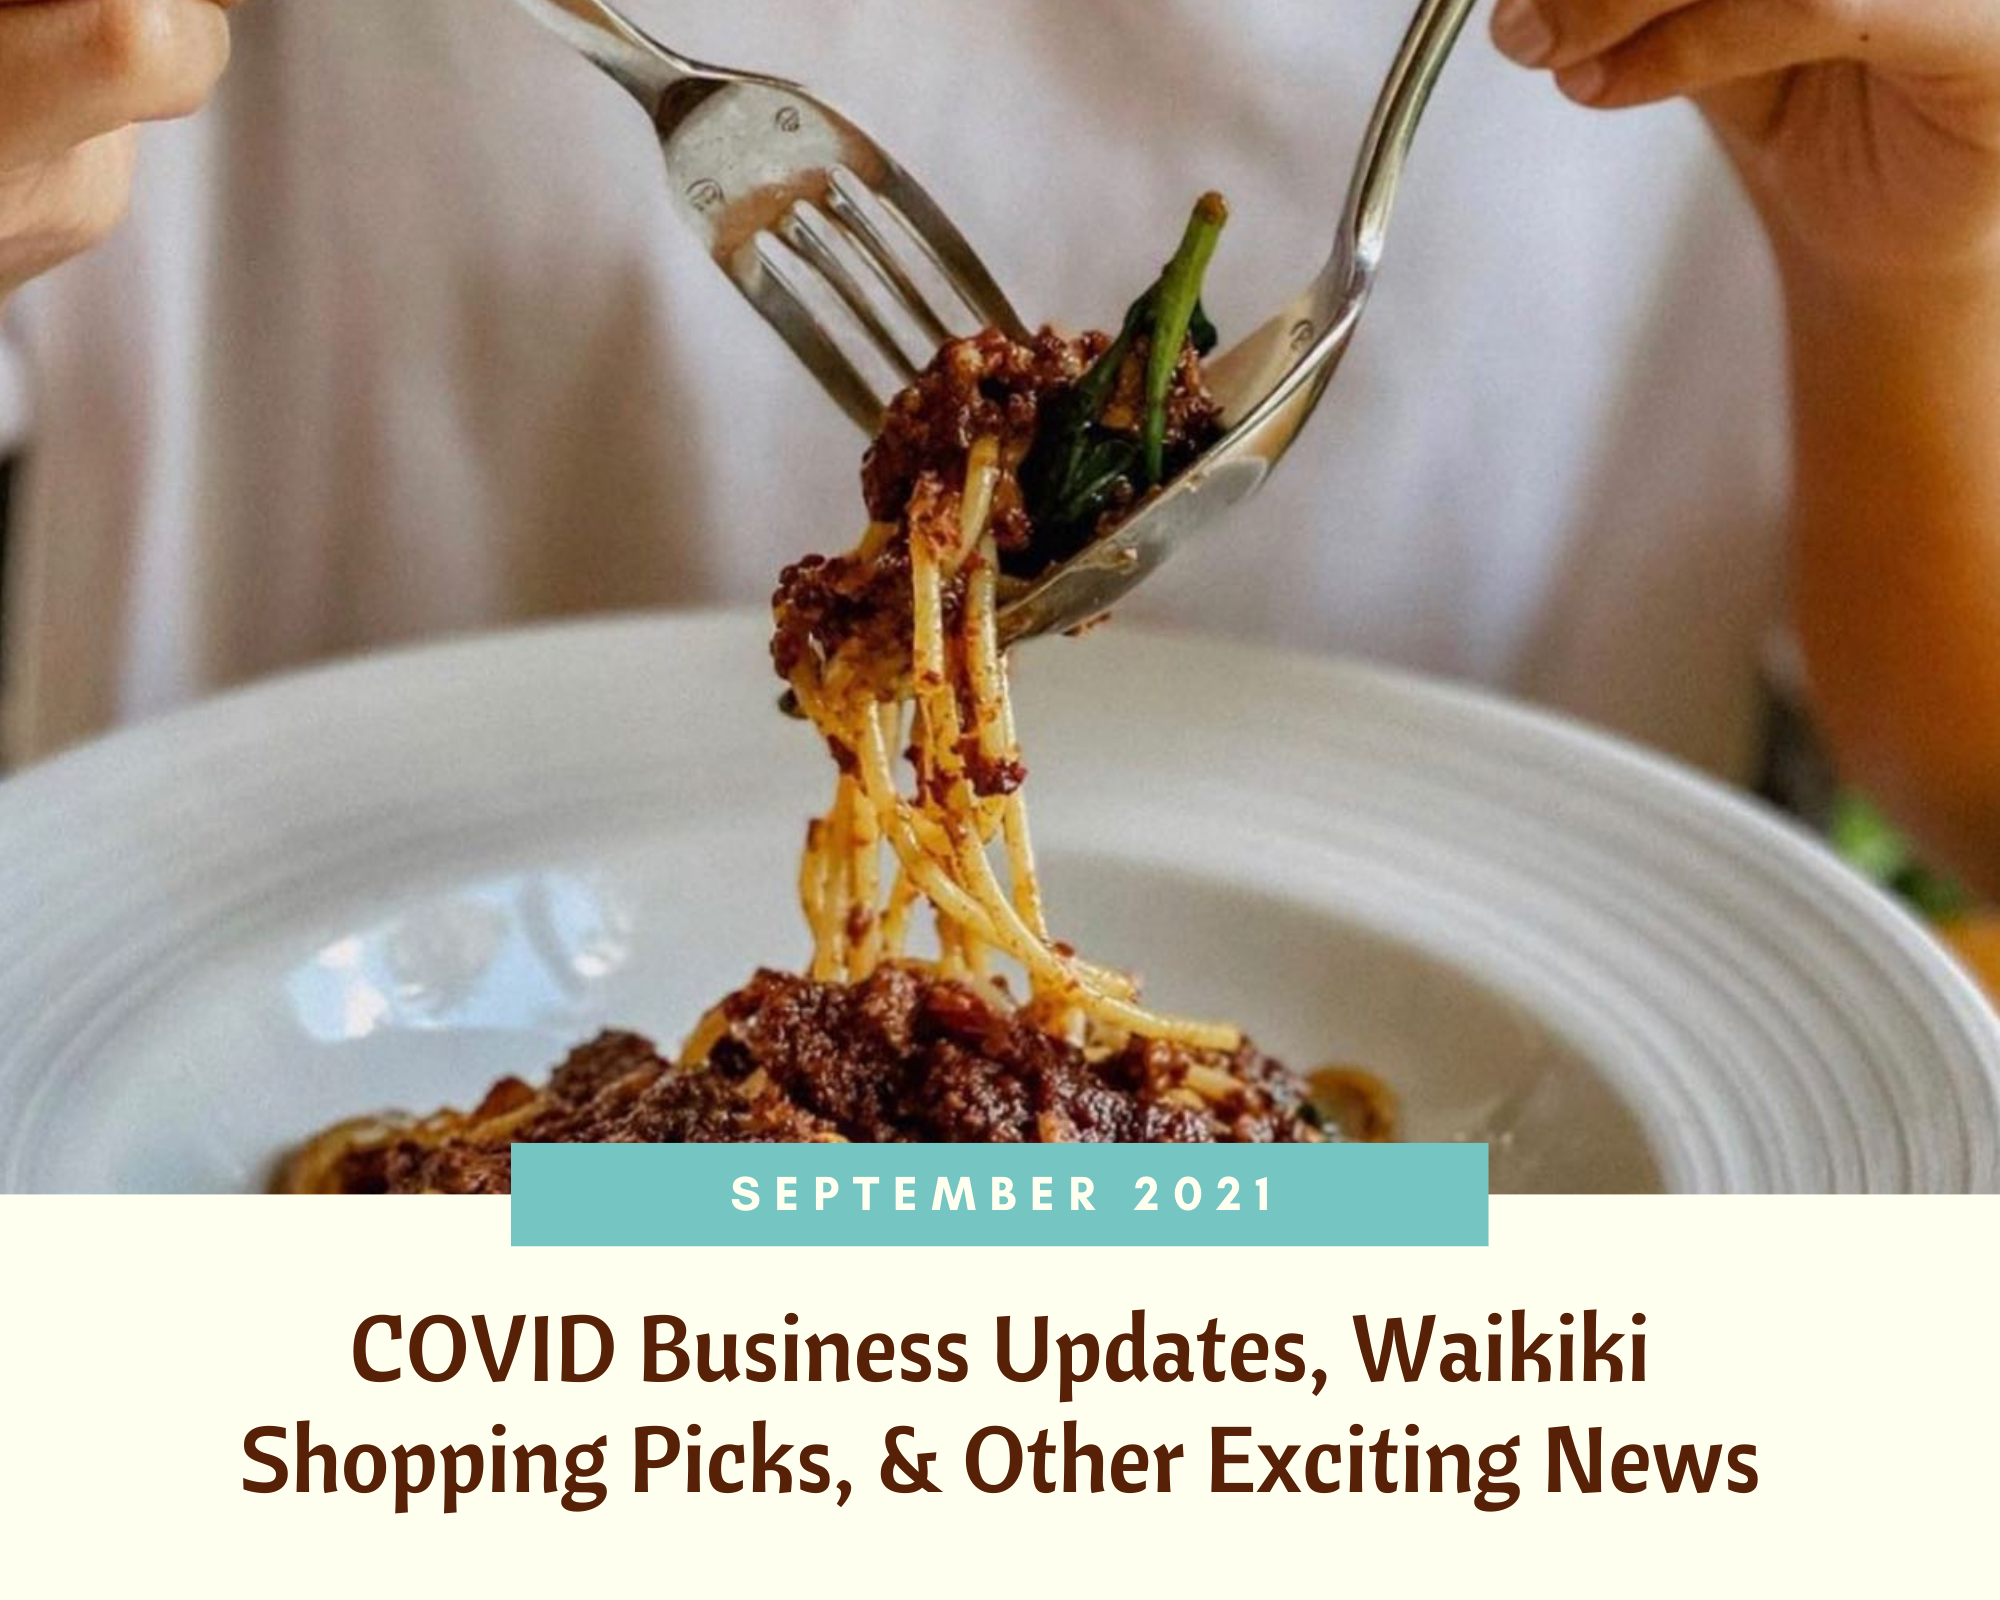 September 2021: COVID Business Updates, Waikiki Shopping Picks, & Other Exciting News